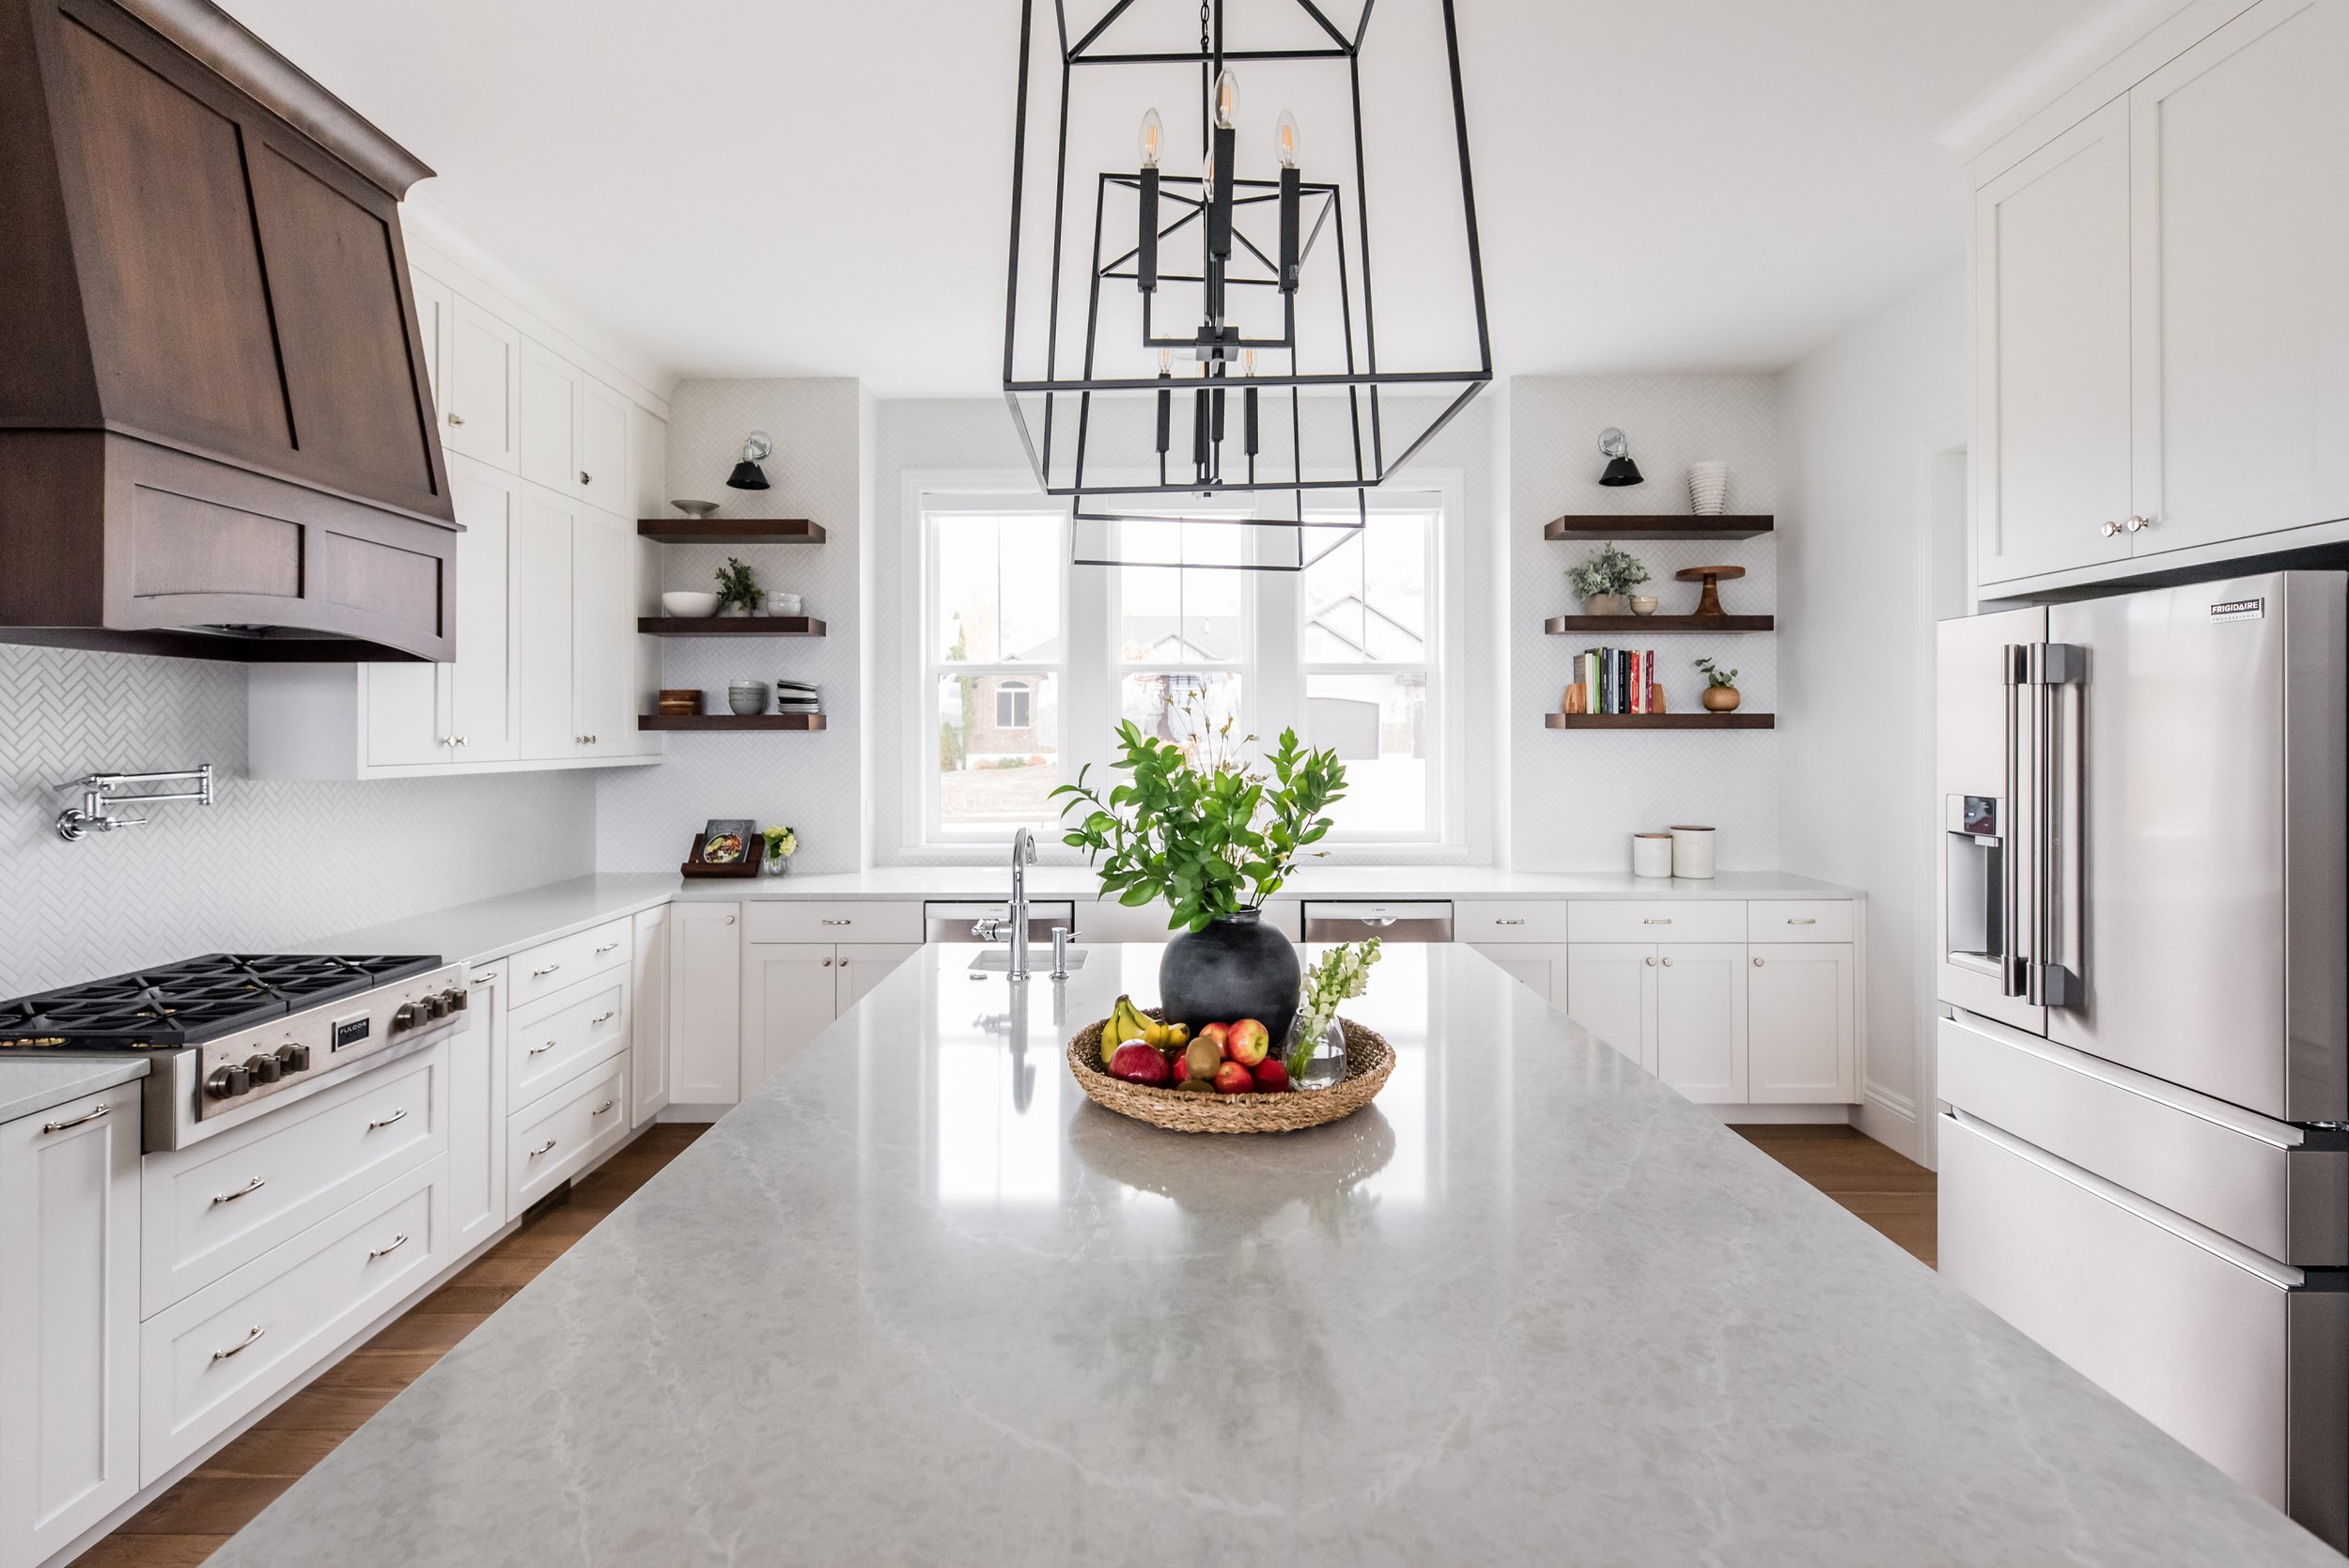  Reasons to consider granite as your countertop choice for your kitchen. Liz Powell Design shares why granite countertops&nbsp; #LizPowellDesign #InteriorDesignUtah #LizPowellDesign #InteriorDesignUtah #InteriorDesigner #buildingahome #countertops #d